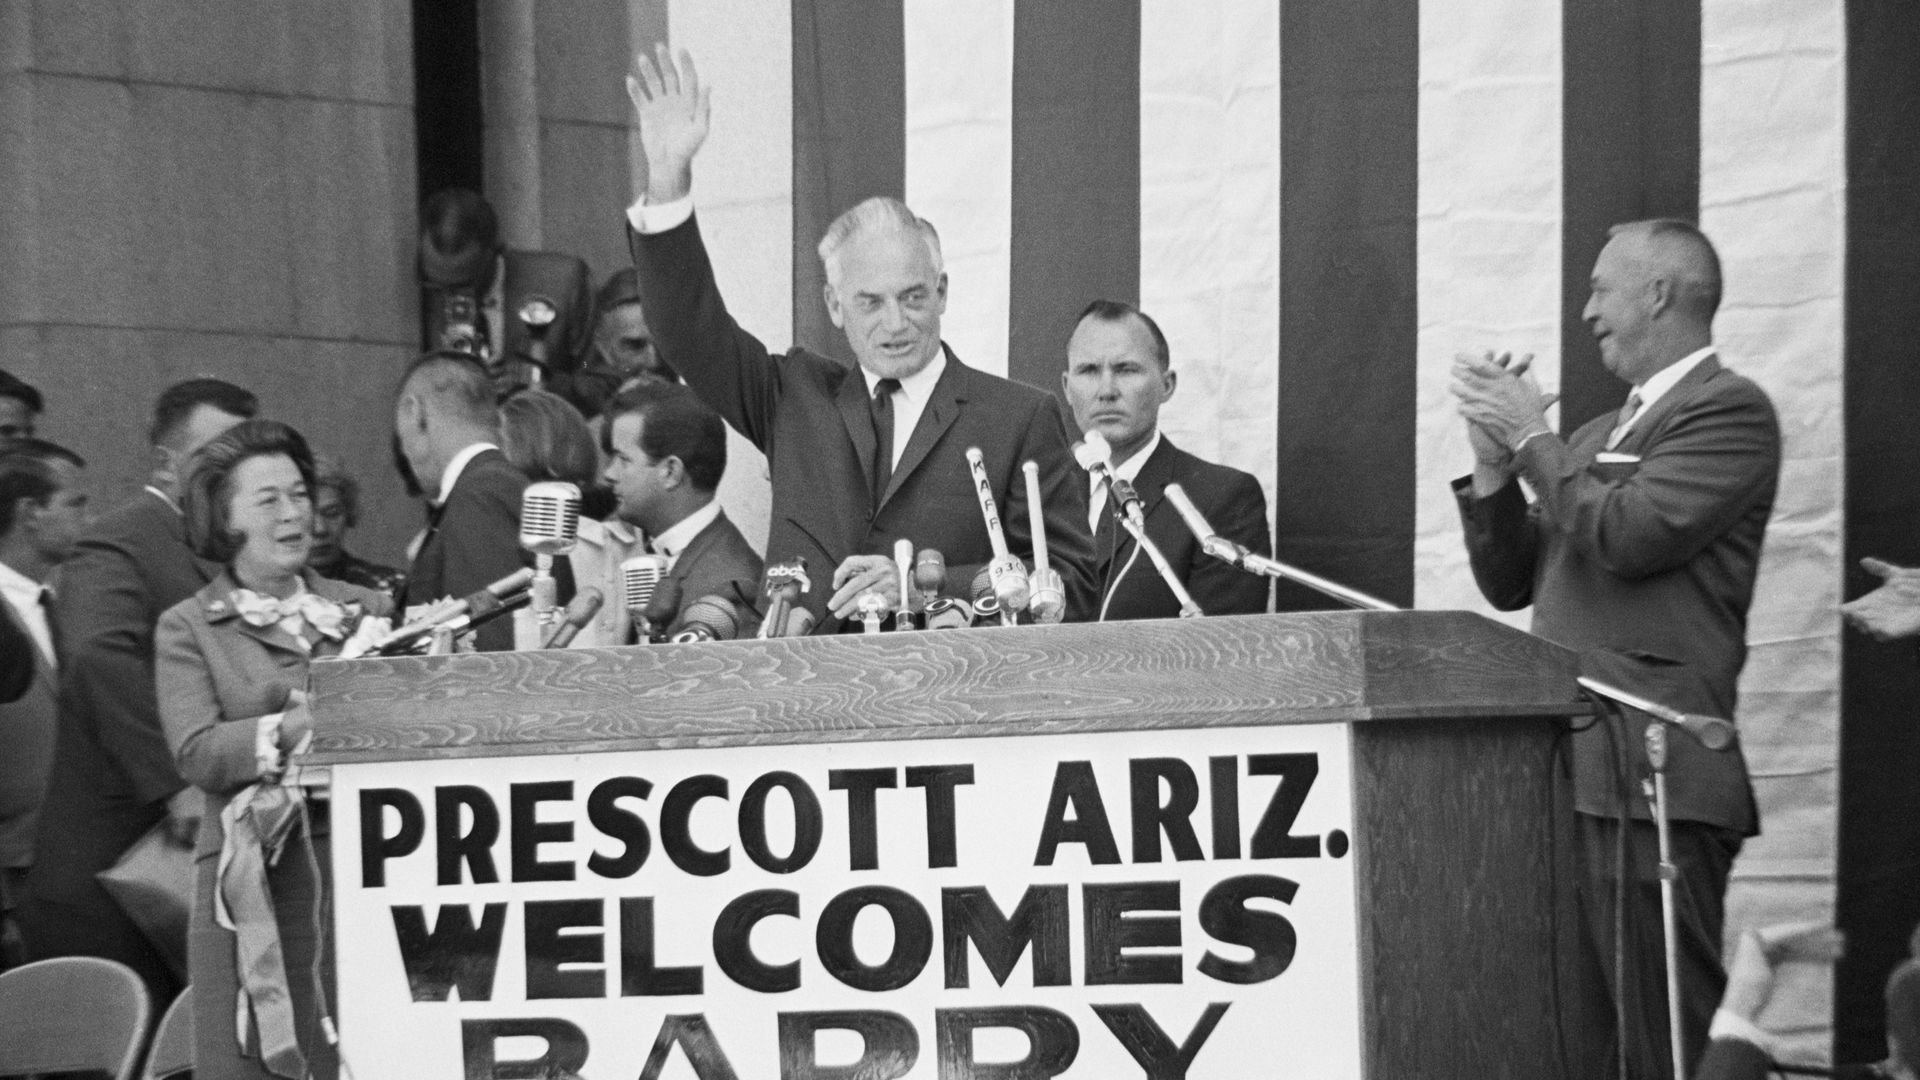 Black and white photo of Barry Goldwater waving while standing in front of a large lectern filled with microphones.